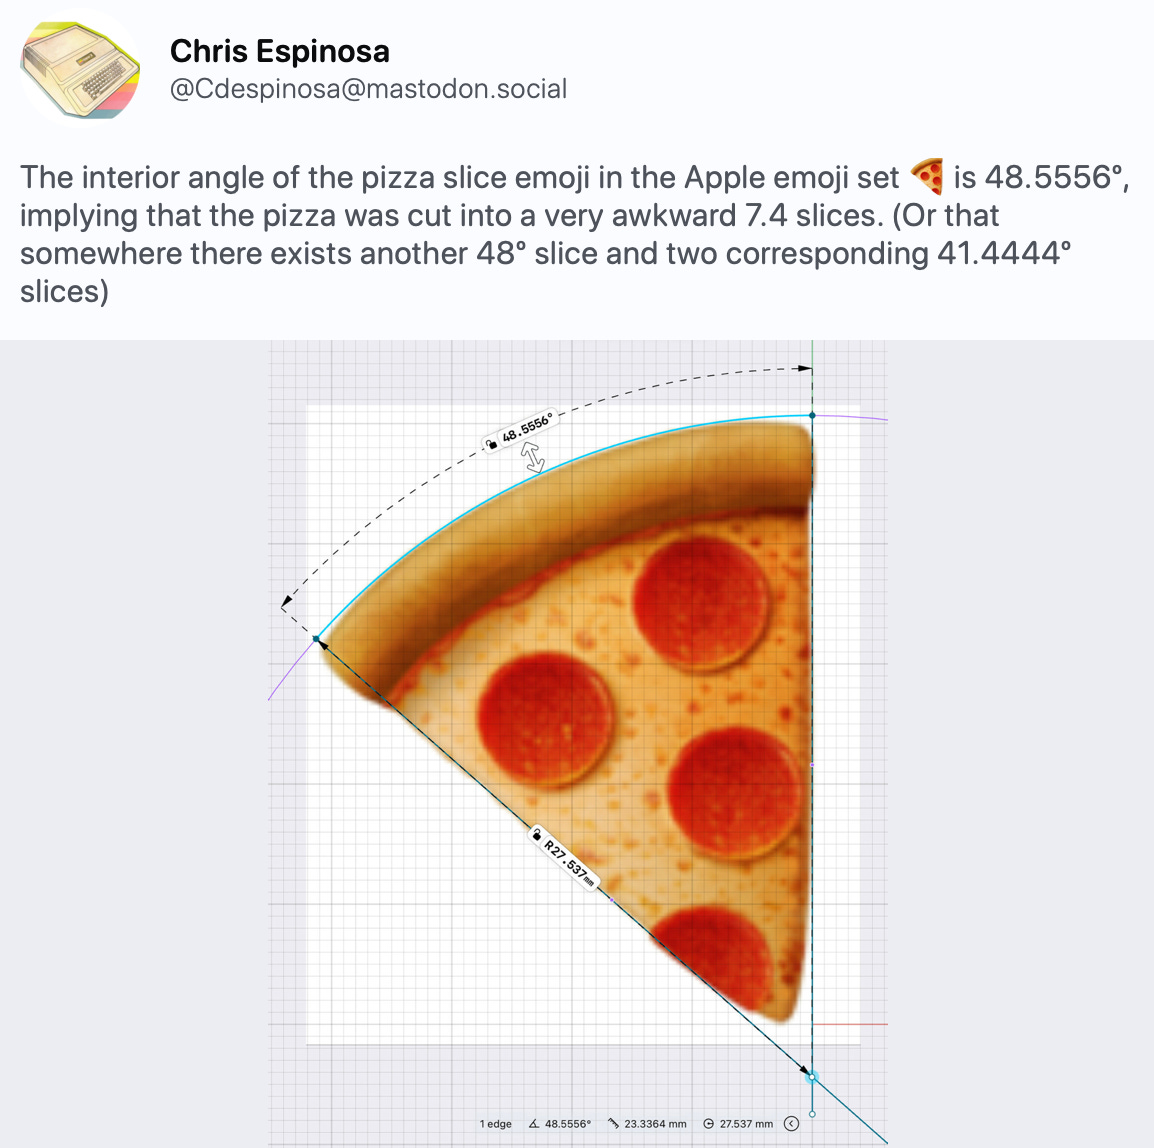 Chris Espinosa @Cdespinosa@mastodon.social The interior angle of the pizza slice emoji in the Apple emoji set 🍕is 48.5556º, implying that the pizza was cut into a very awkward 7.4 slices. (Or that somewhere there exists another 48º slice and two corresponding 41.4444º slices)